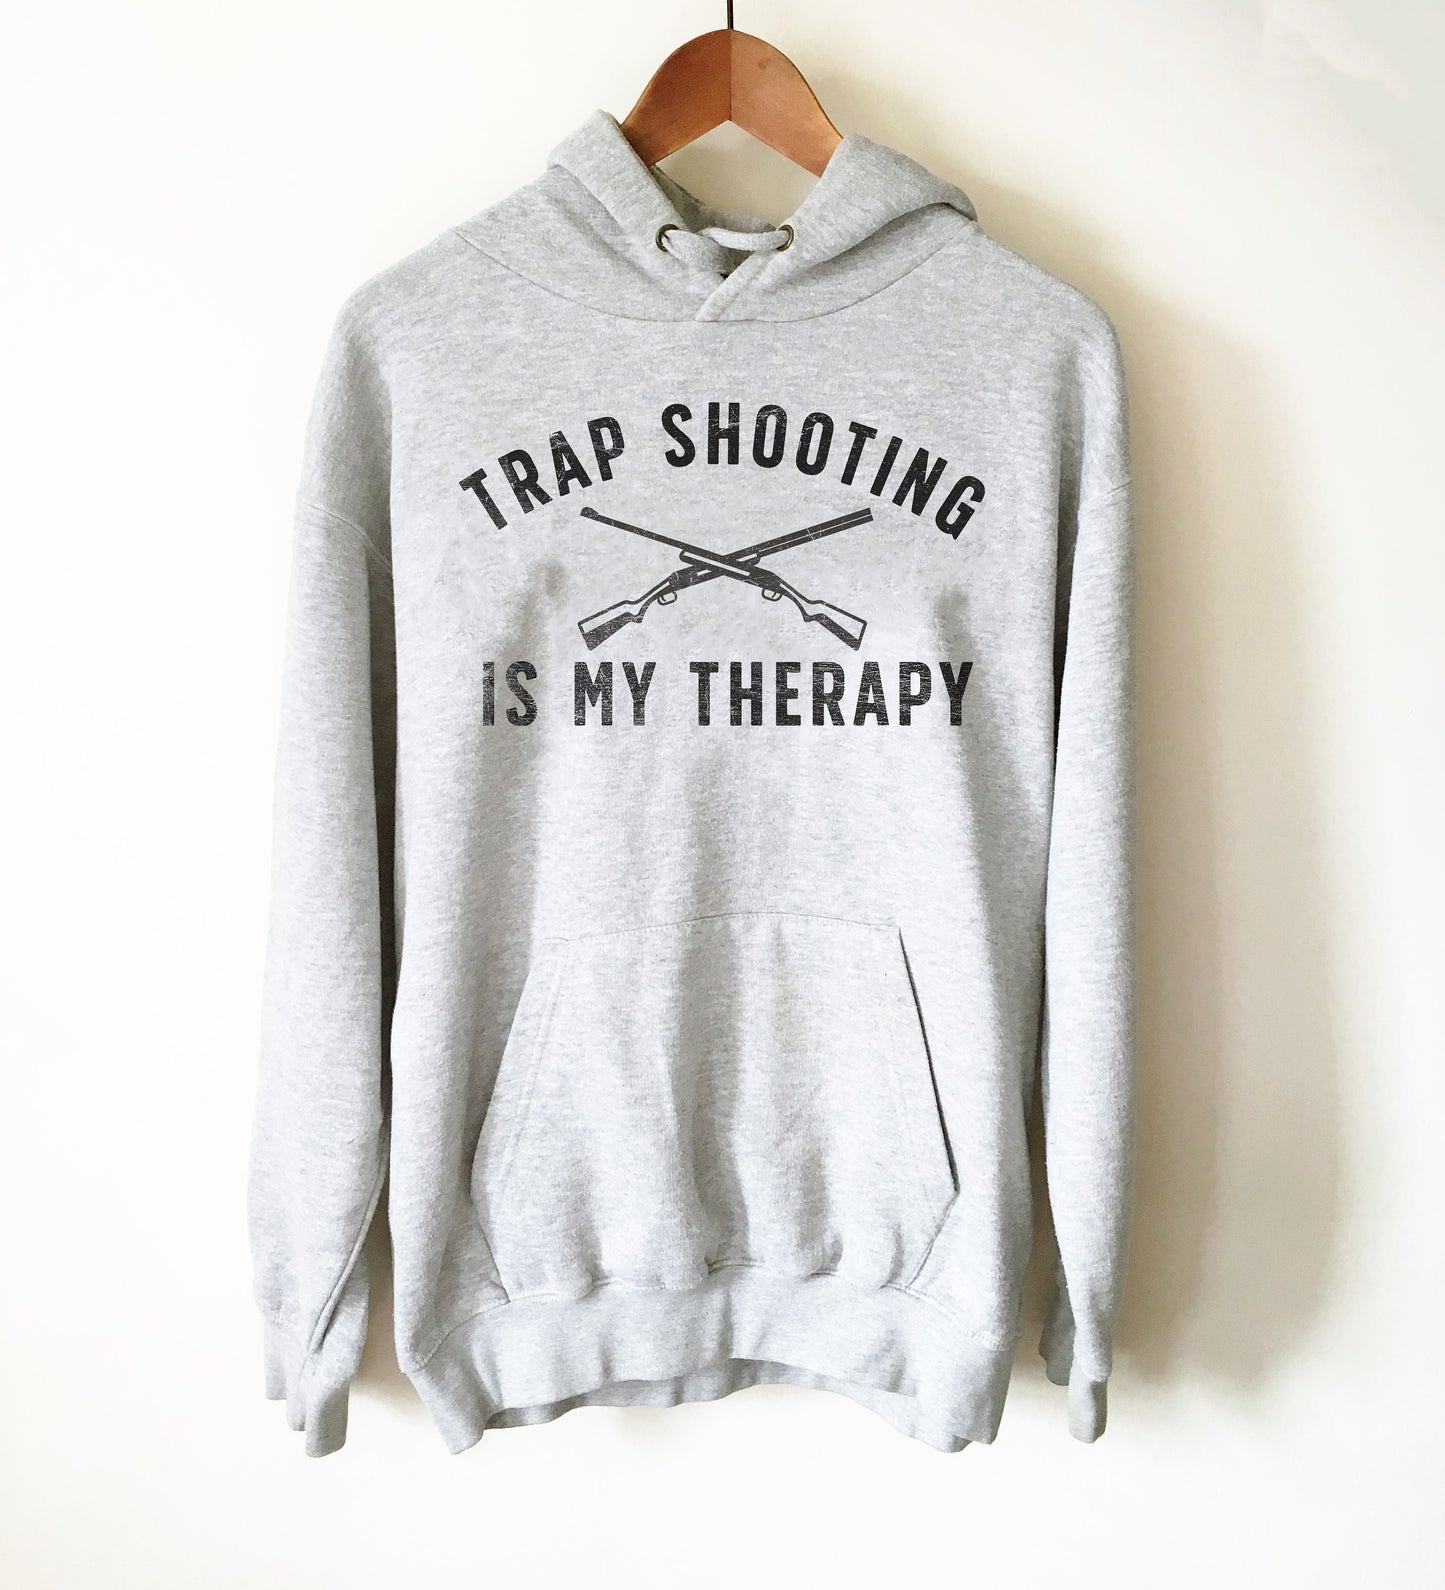 Trap Shooting Is My Therapy Hoodie - Trap Shooting Shirt, Trap Shooting Gift, Clay Pigeon Shooting, Clay Shooting, Shooting Shirt